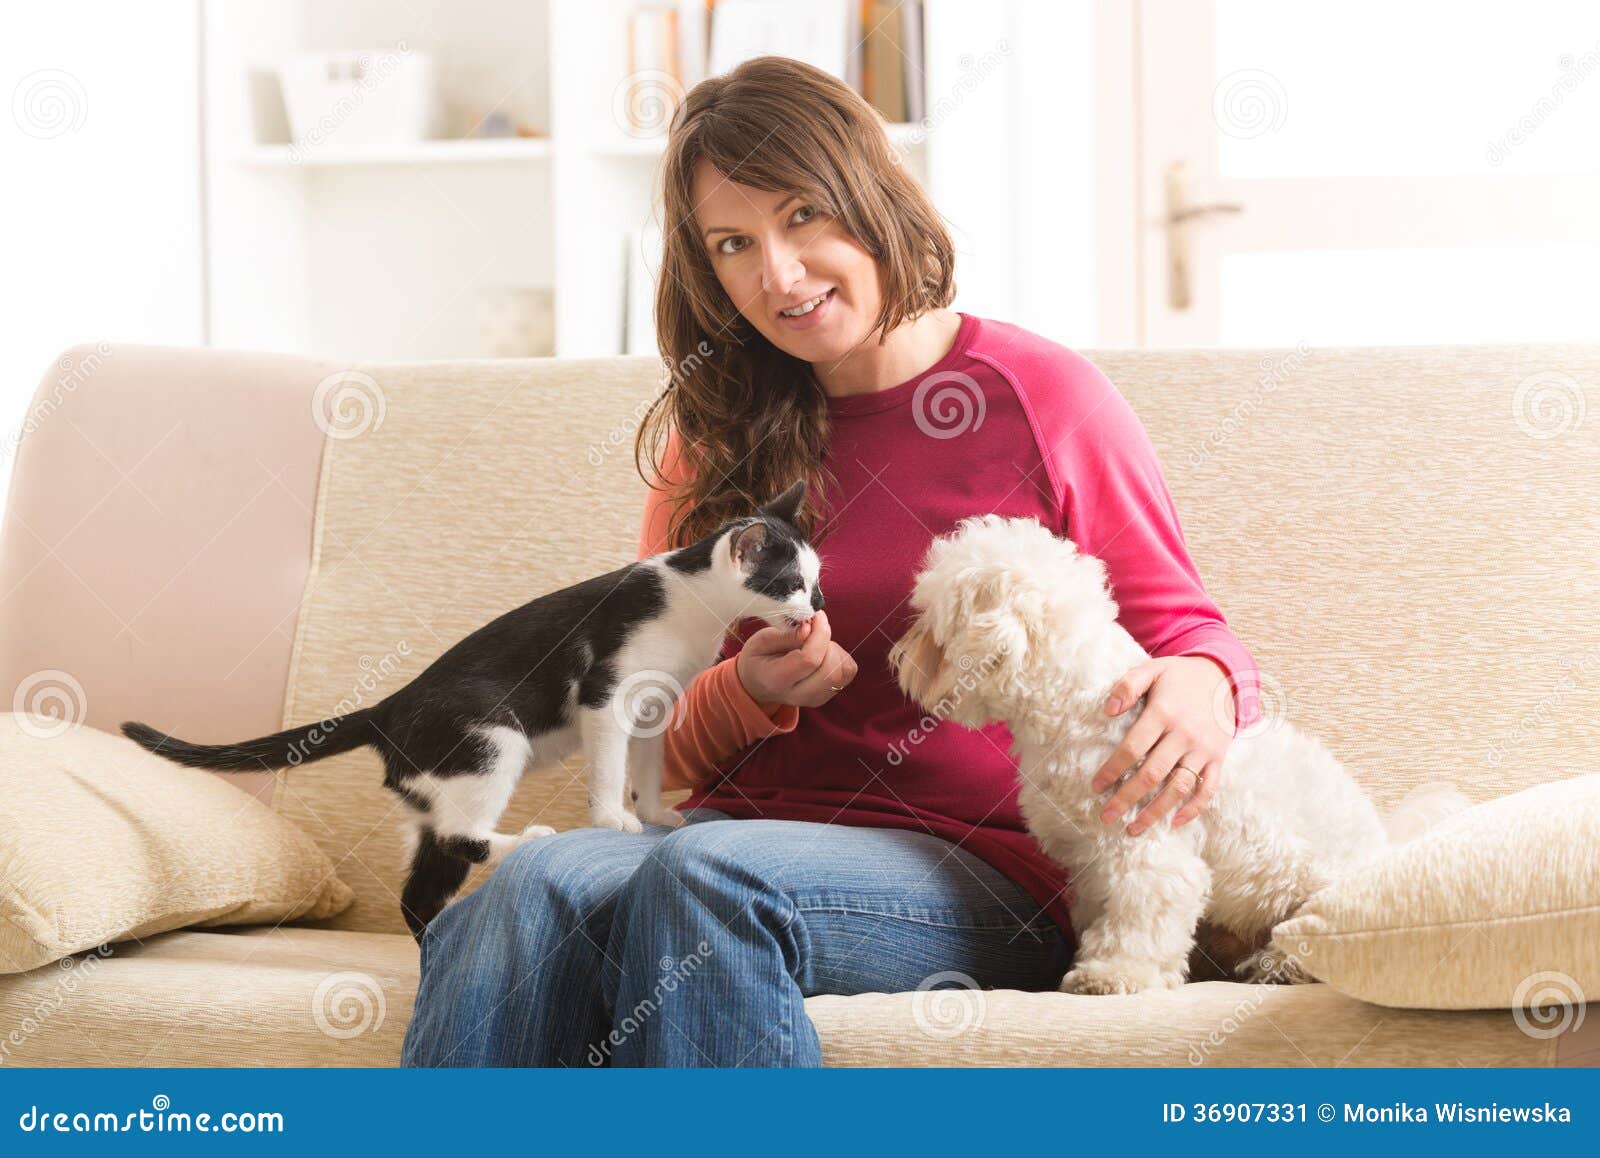 owner with cat and dog